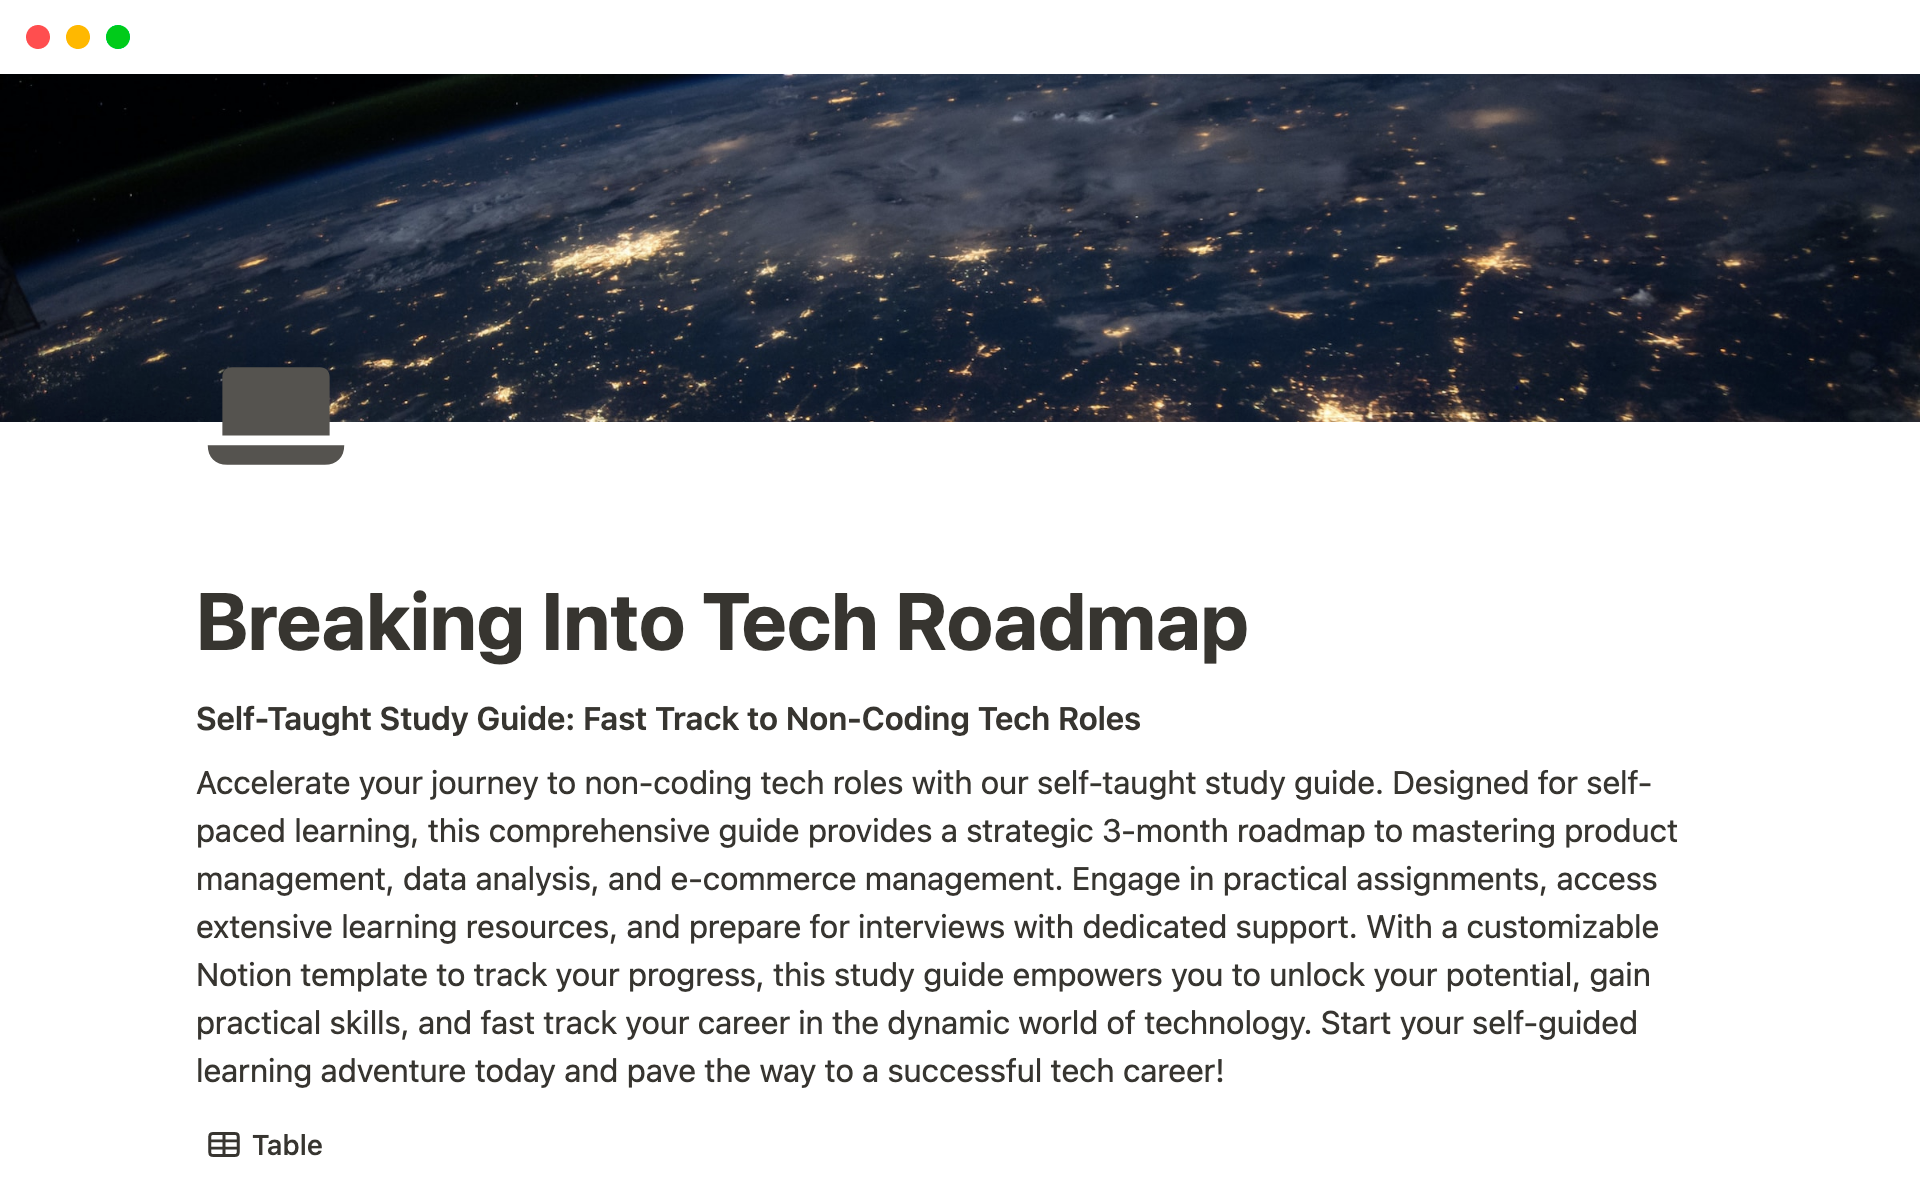 Accelerate your tech career with the "Notion Template Breaking Into Tech Roadmap: 90 Day Up-skill Challenge."